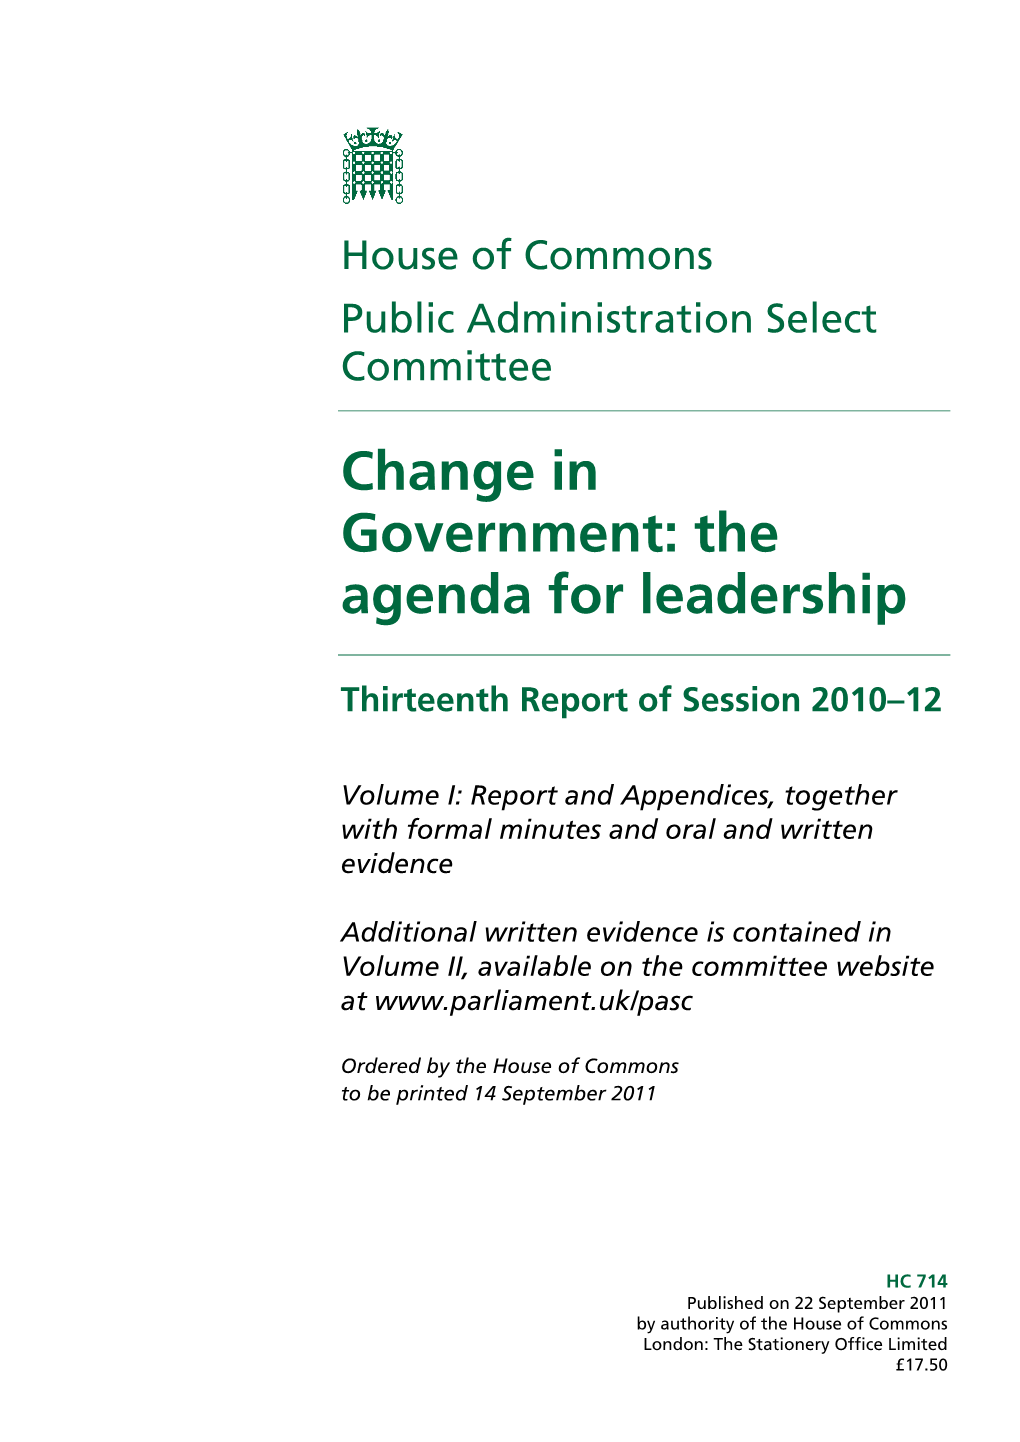 Change in Government: the Agenda for Leadership